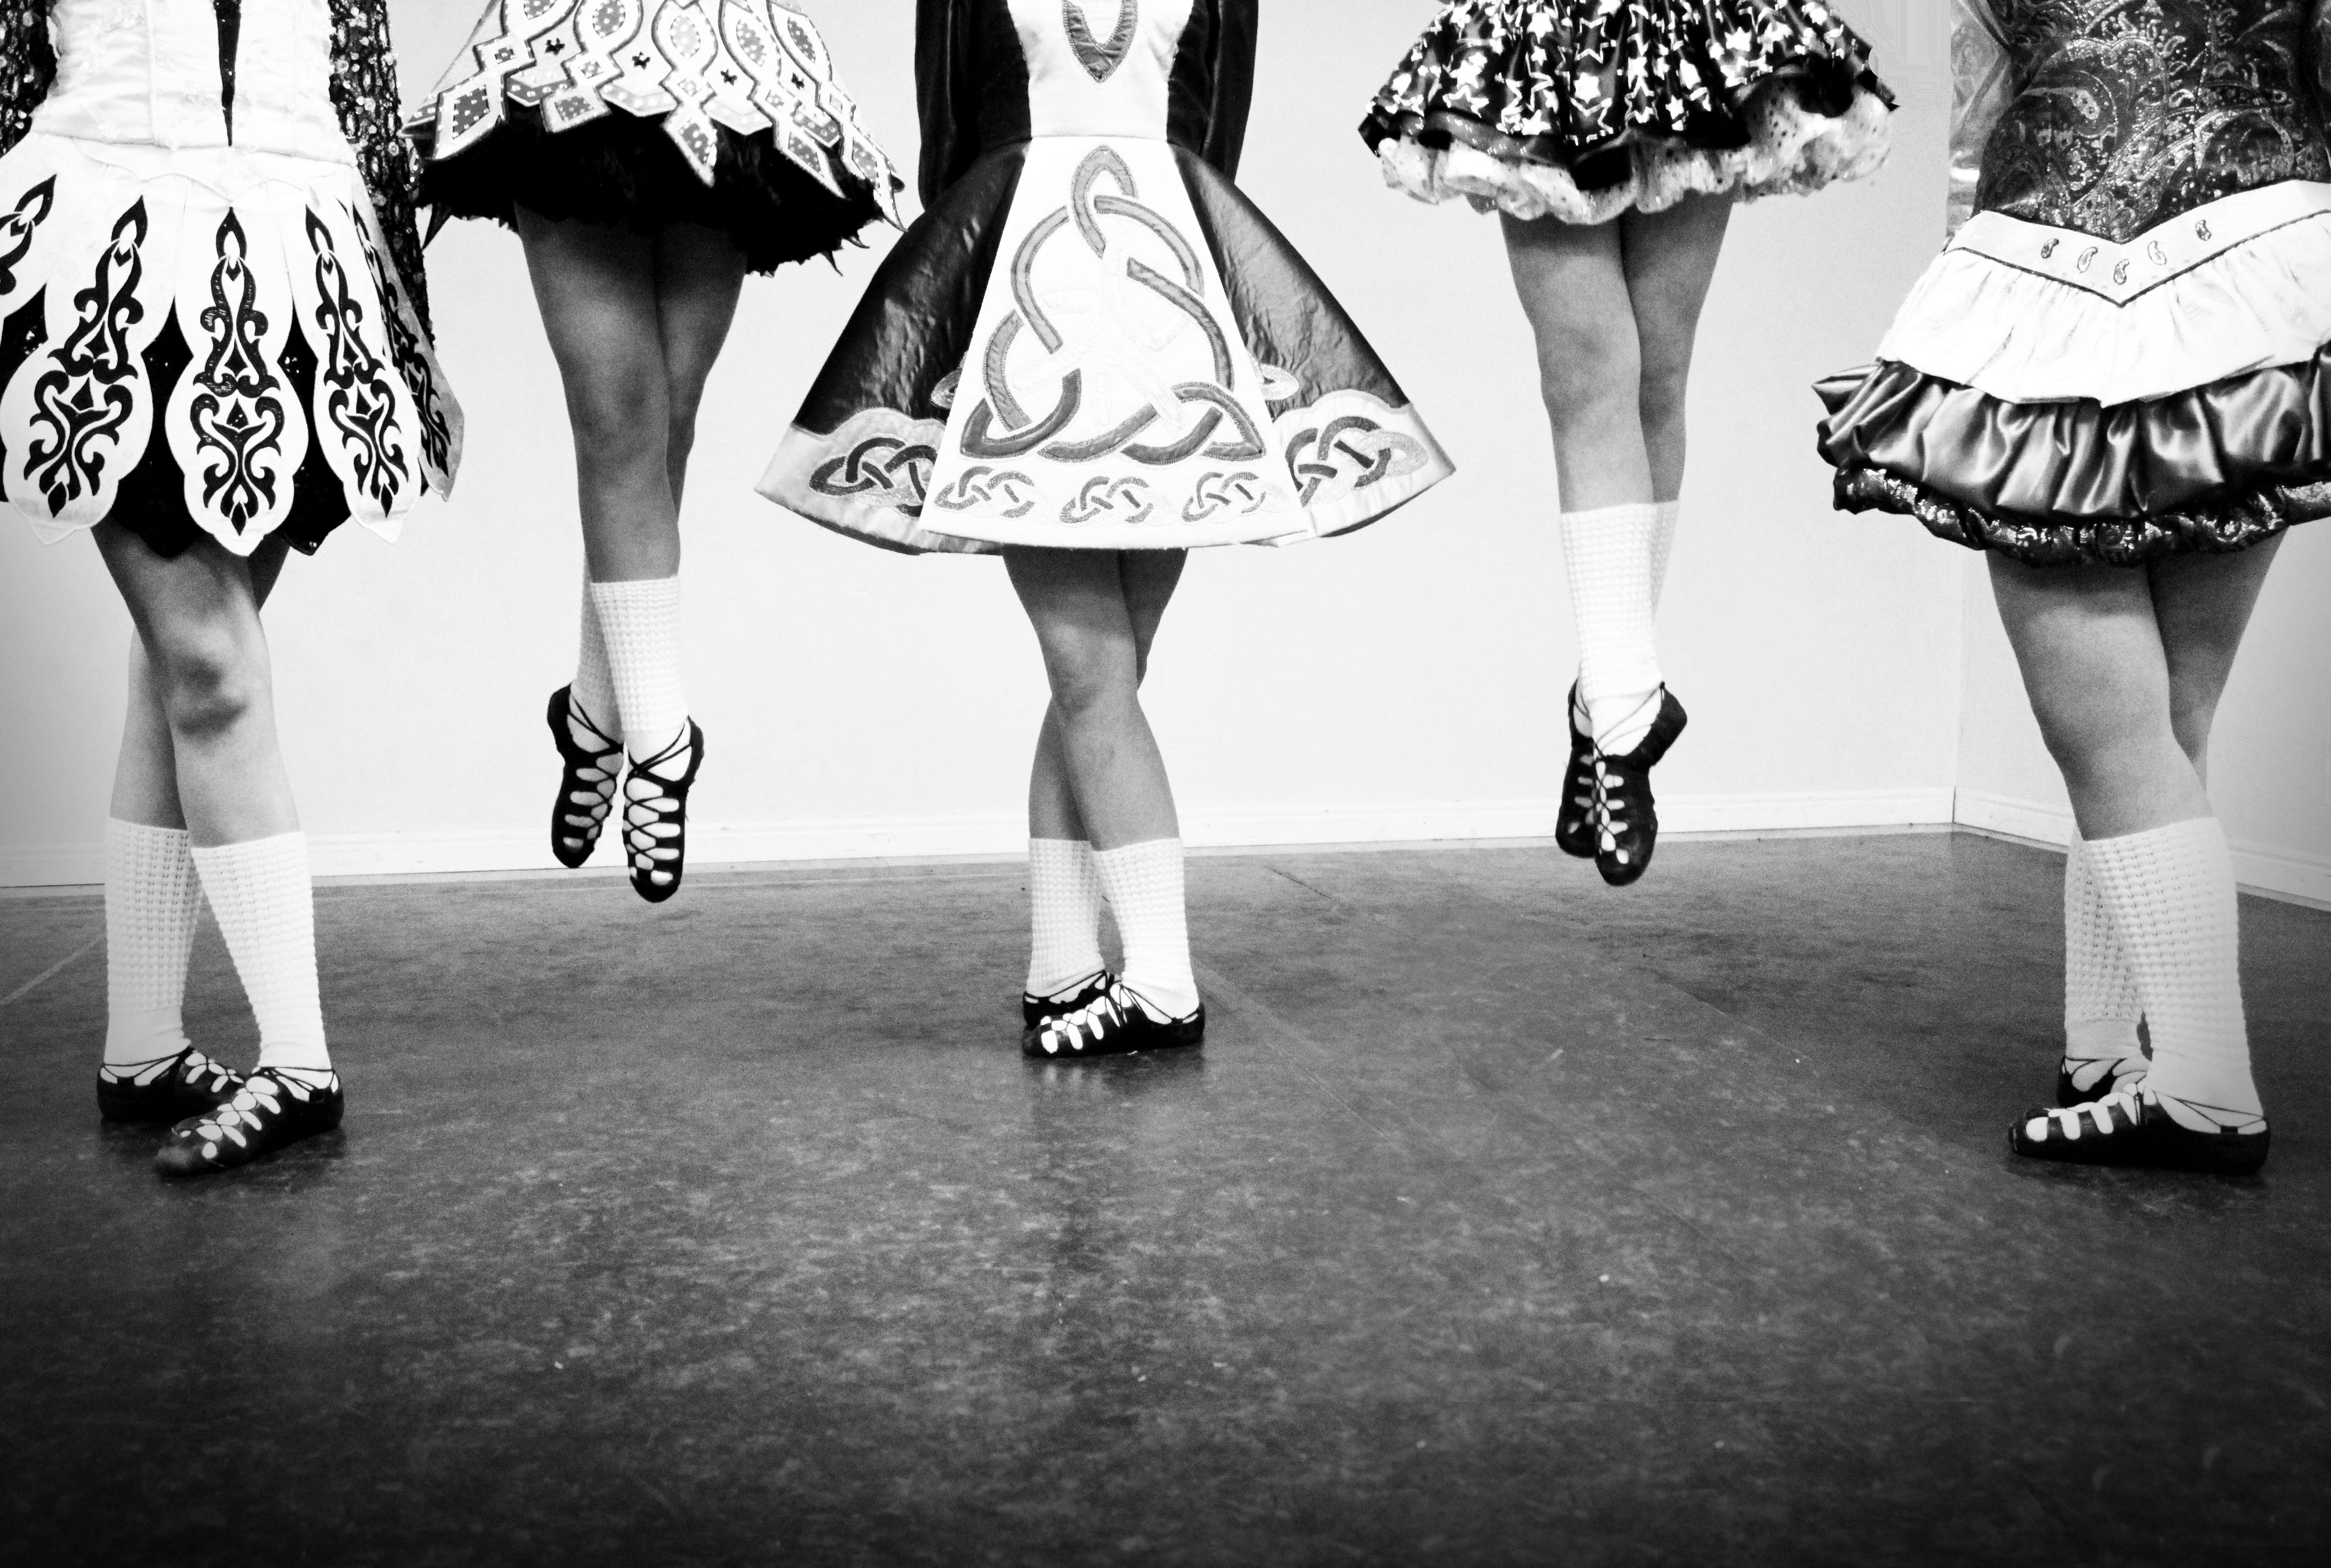 Black and white photo, 5 female Irish Dancers shown from the waist down, two in the air